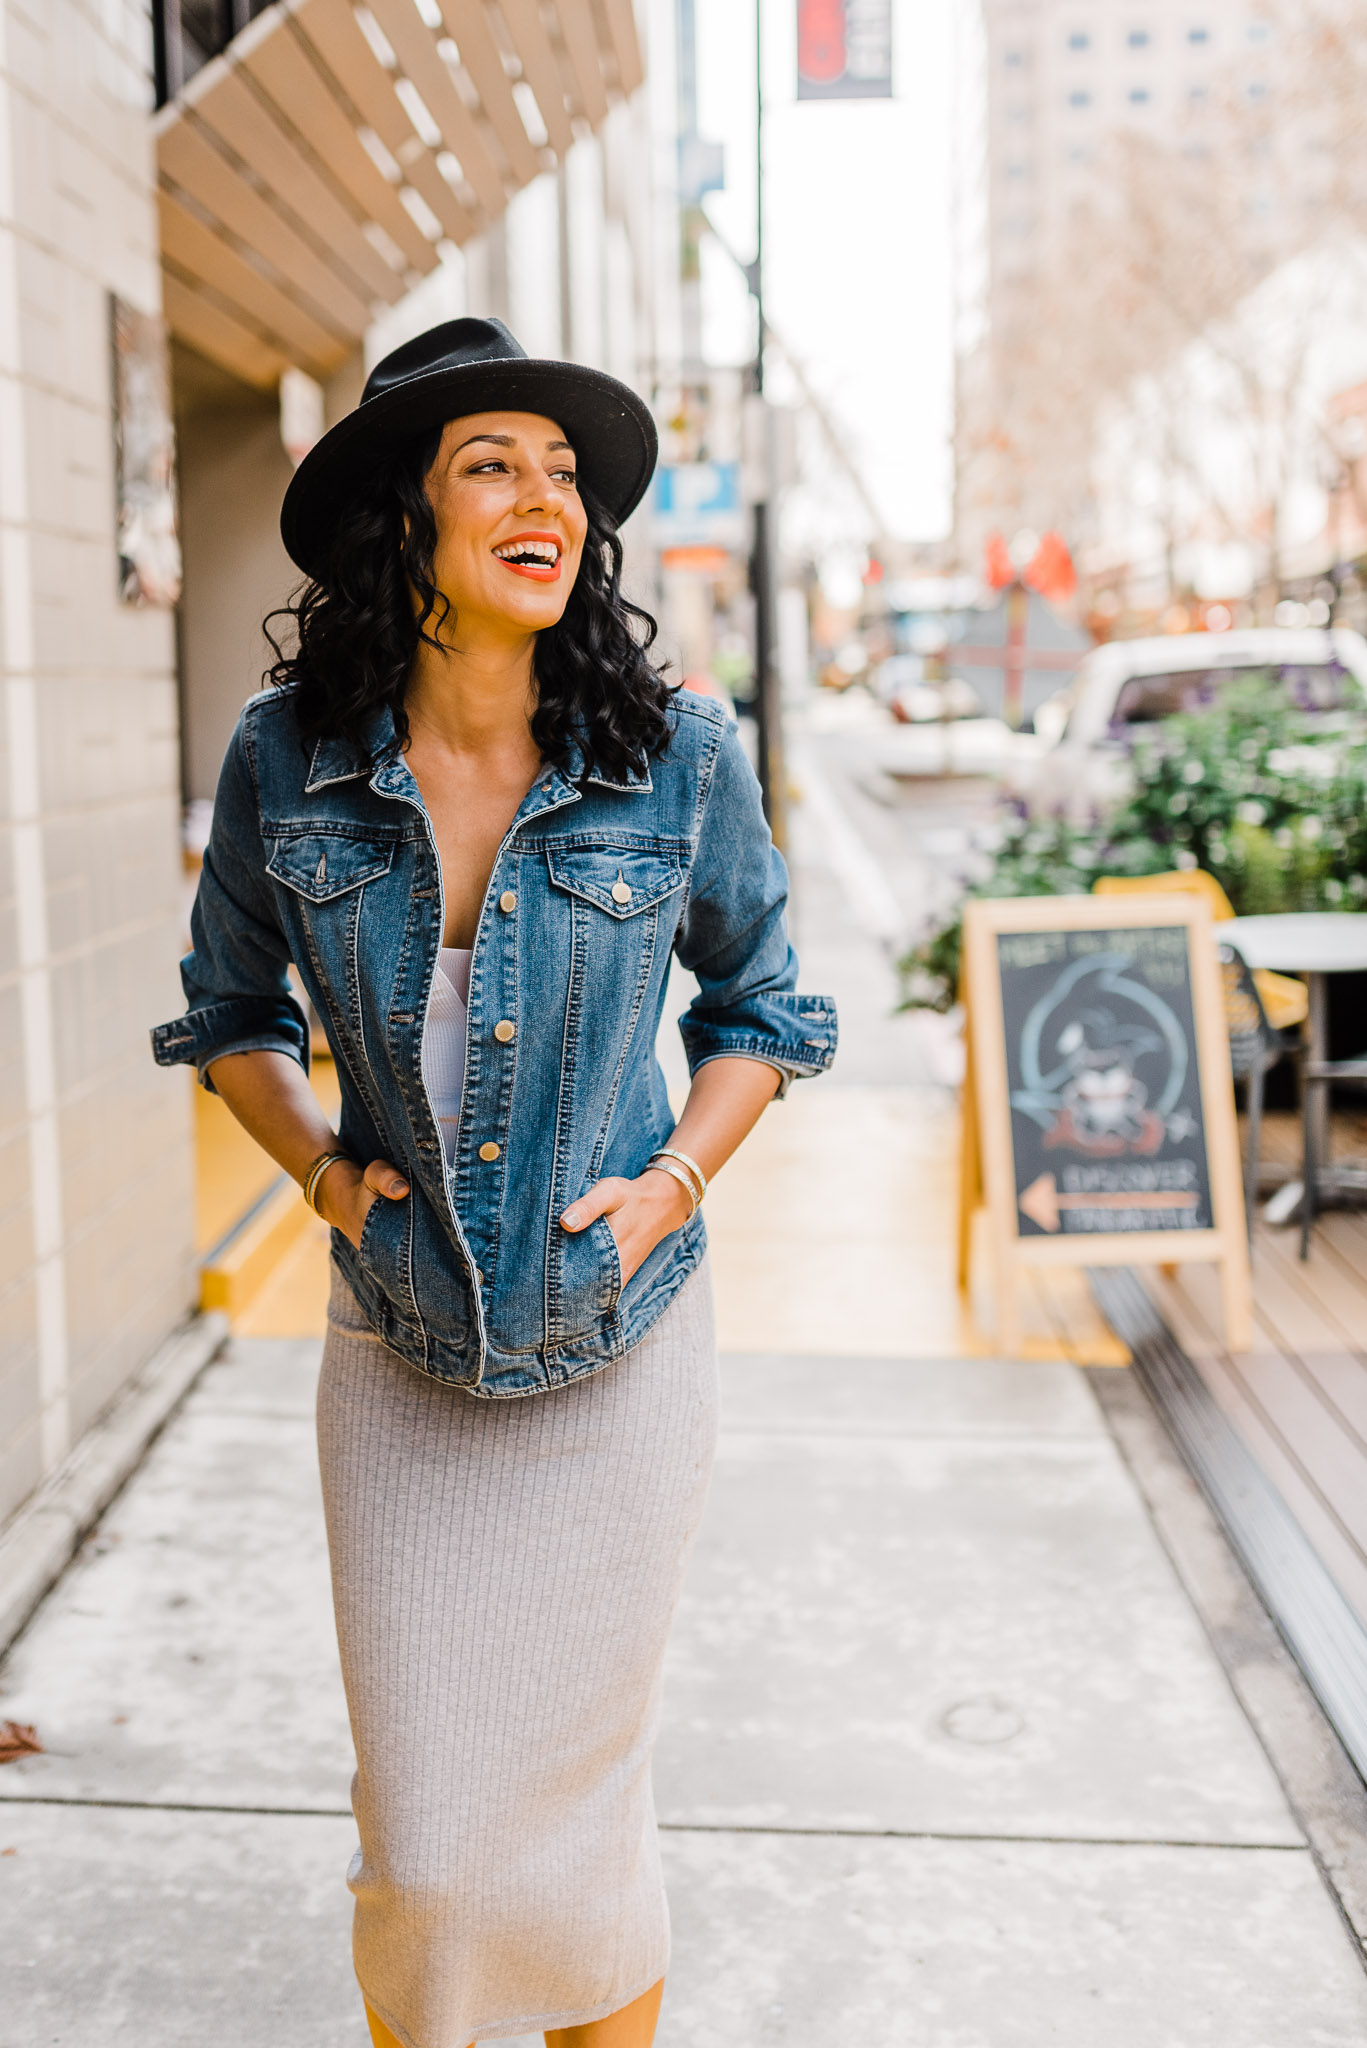 Woman walking down the sidewalk, looking away from the camera and laughing. She's wearing a gray maxi dress, denim jacket, and a black hat.